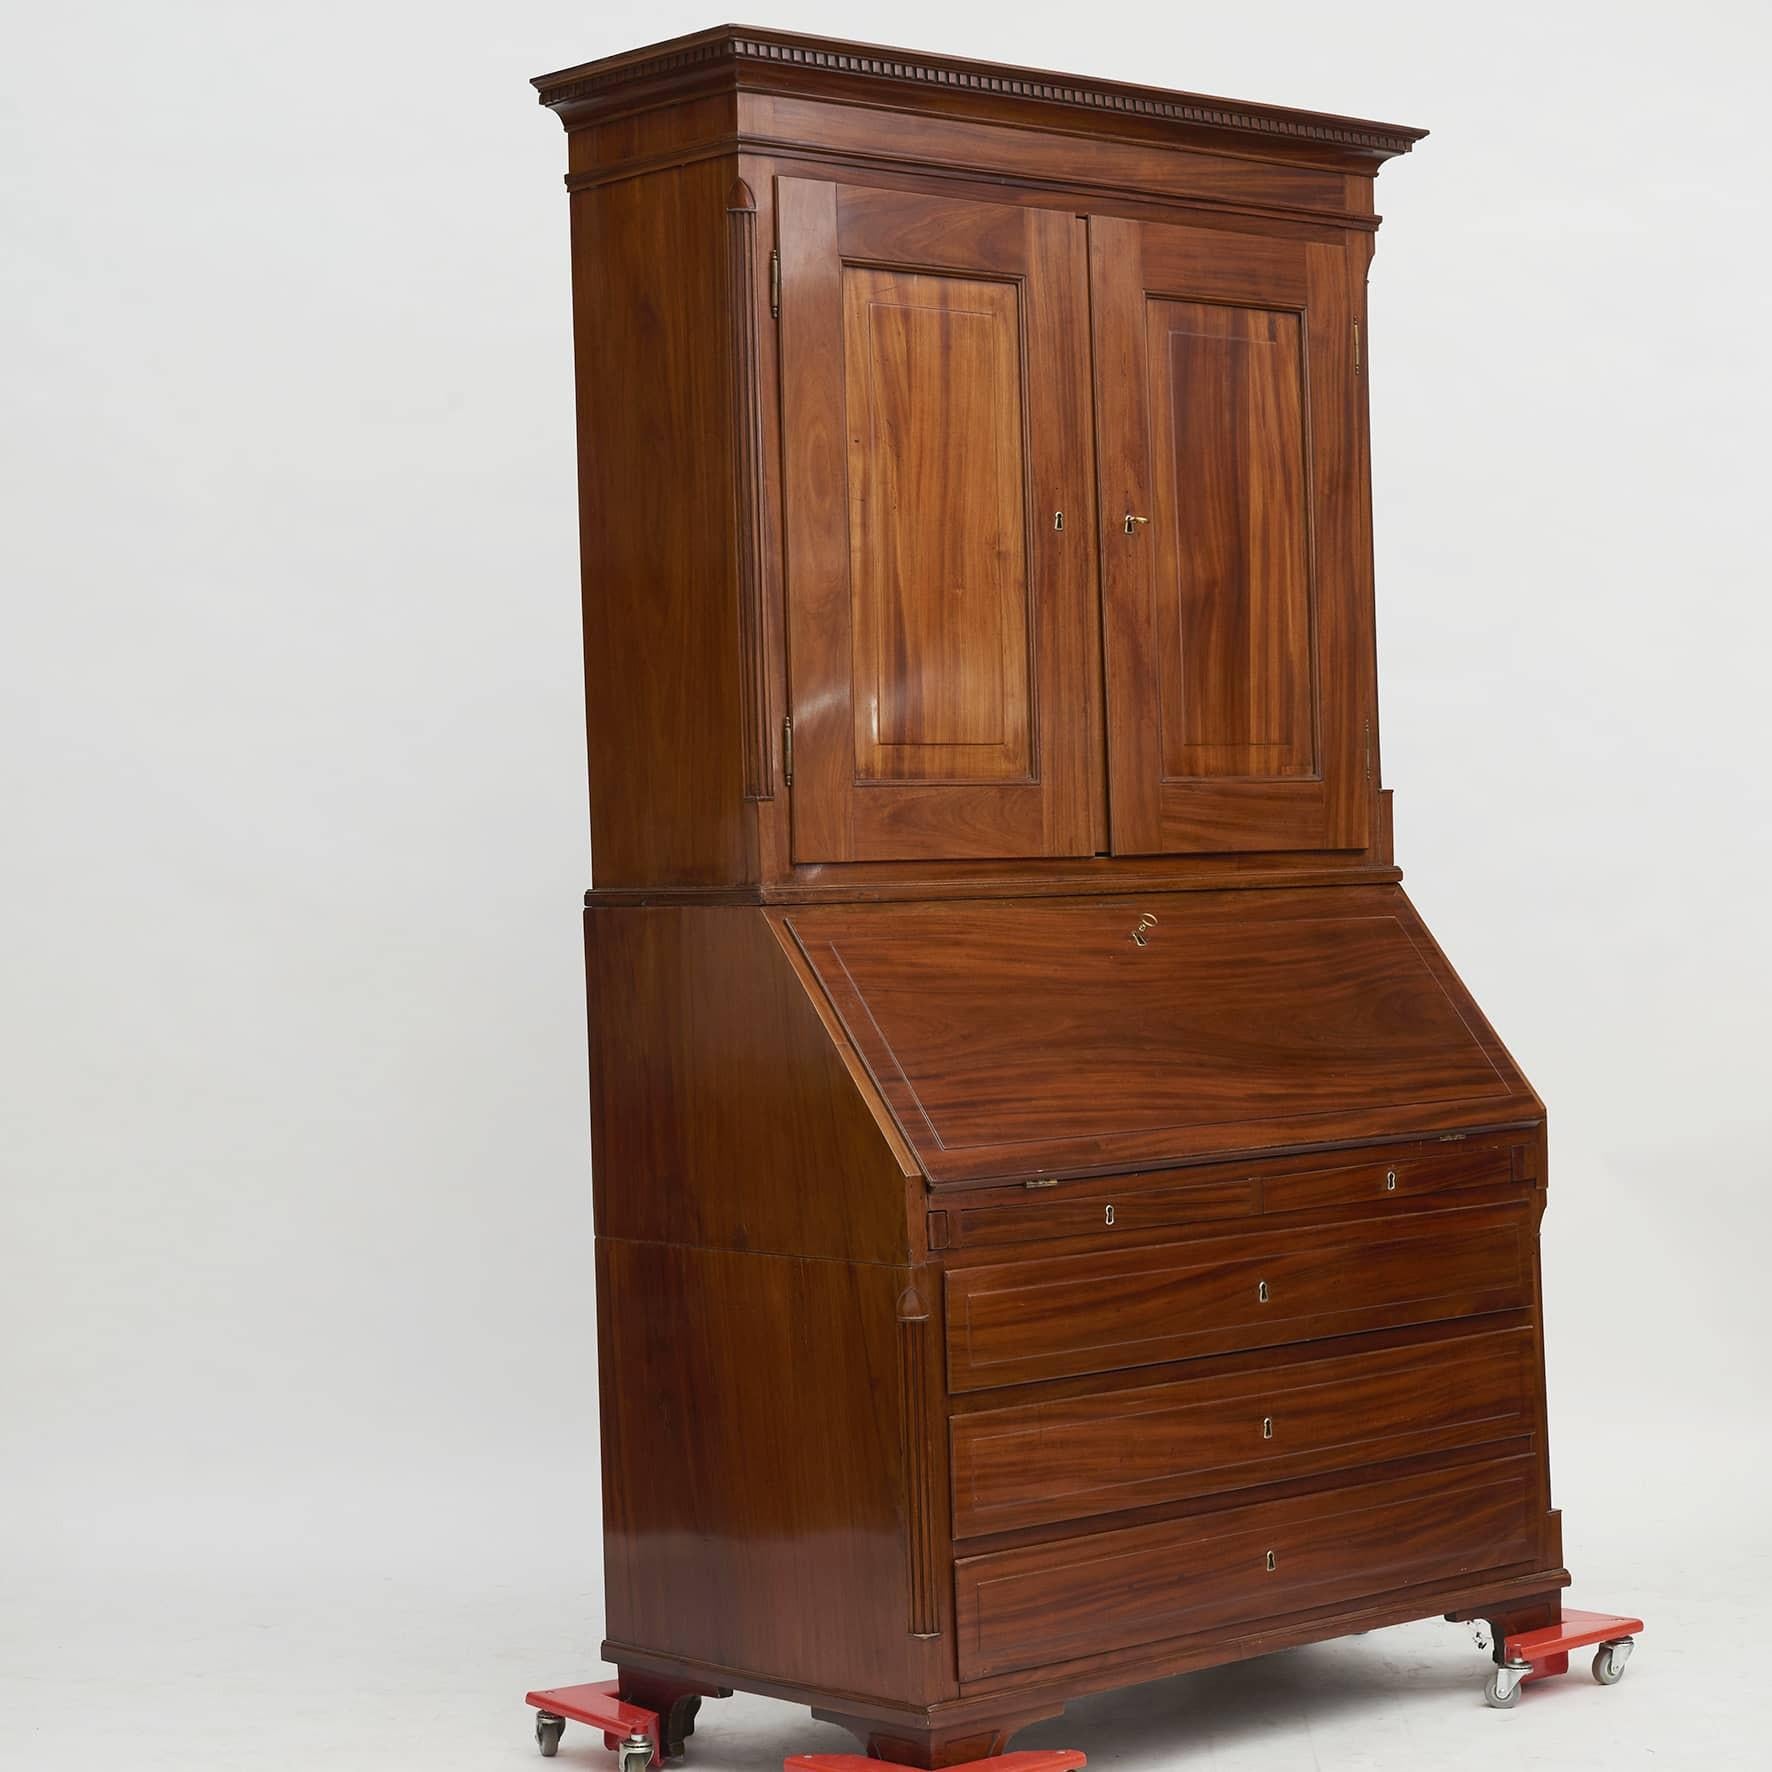 Elegant Louis XVI bureau in solid mahogany. In 3 parts.
Top with tooth cut profiled top list. Pair of doors with fillings, sides with profiled quartz columns.
Bottom part with slant-front desk behind which numerous small drawers with knobs in